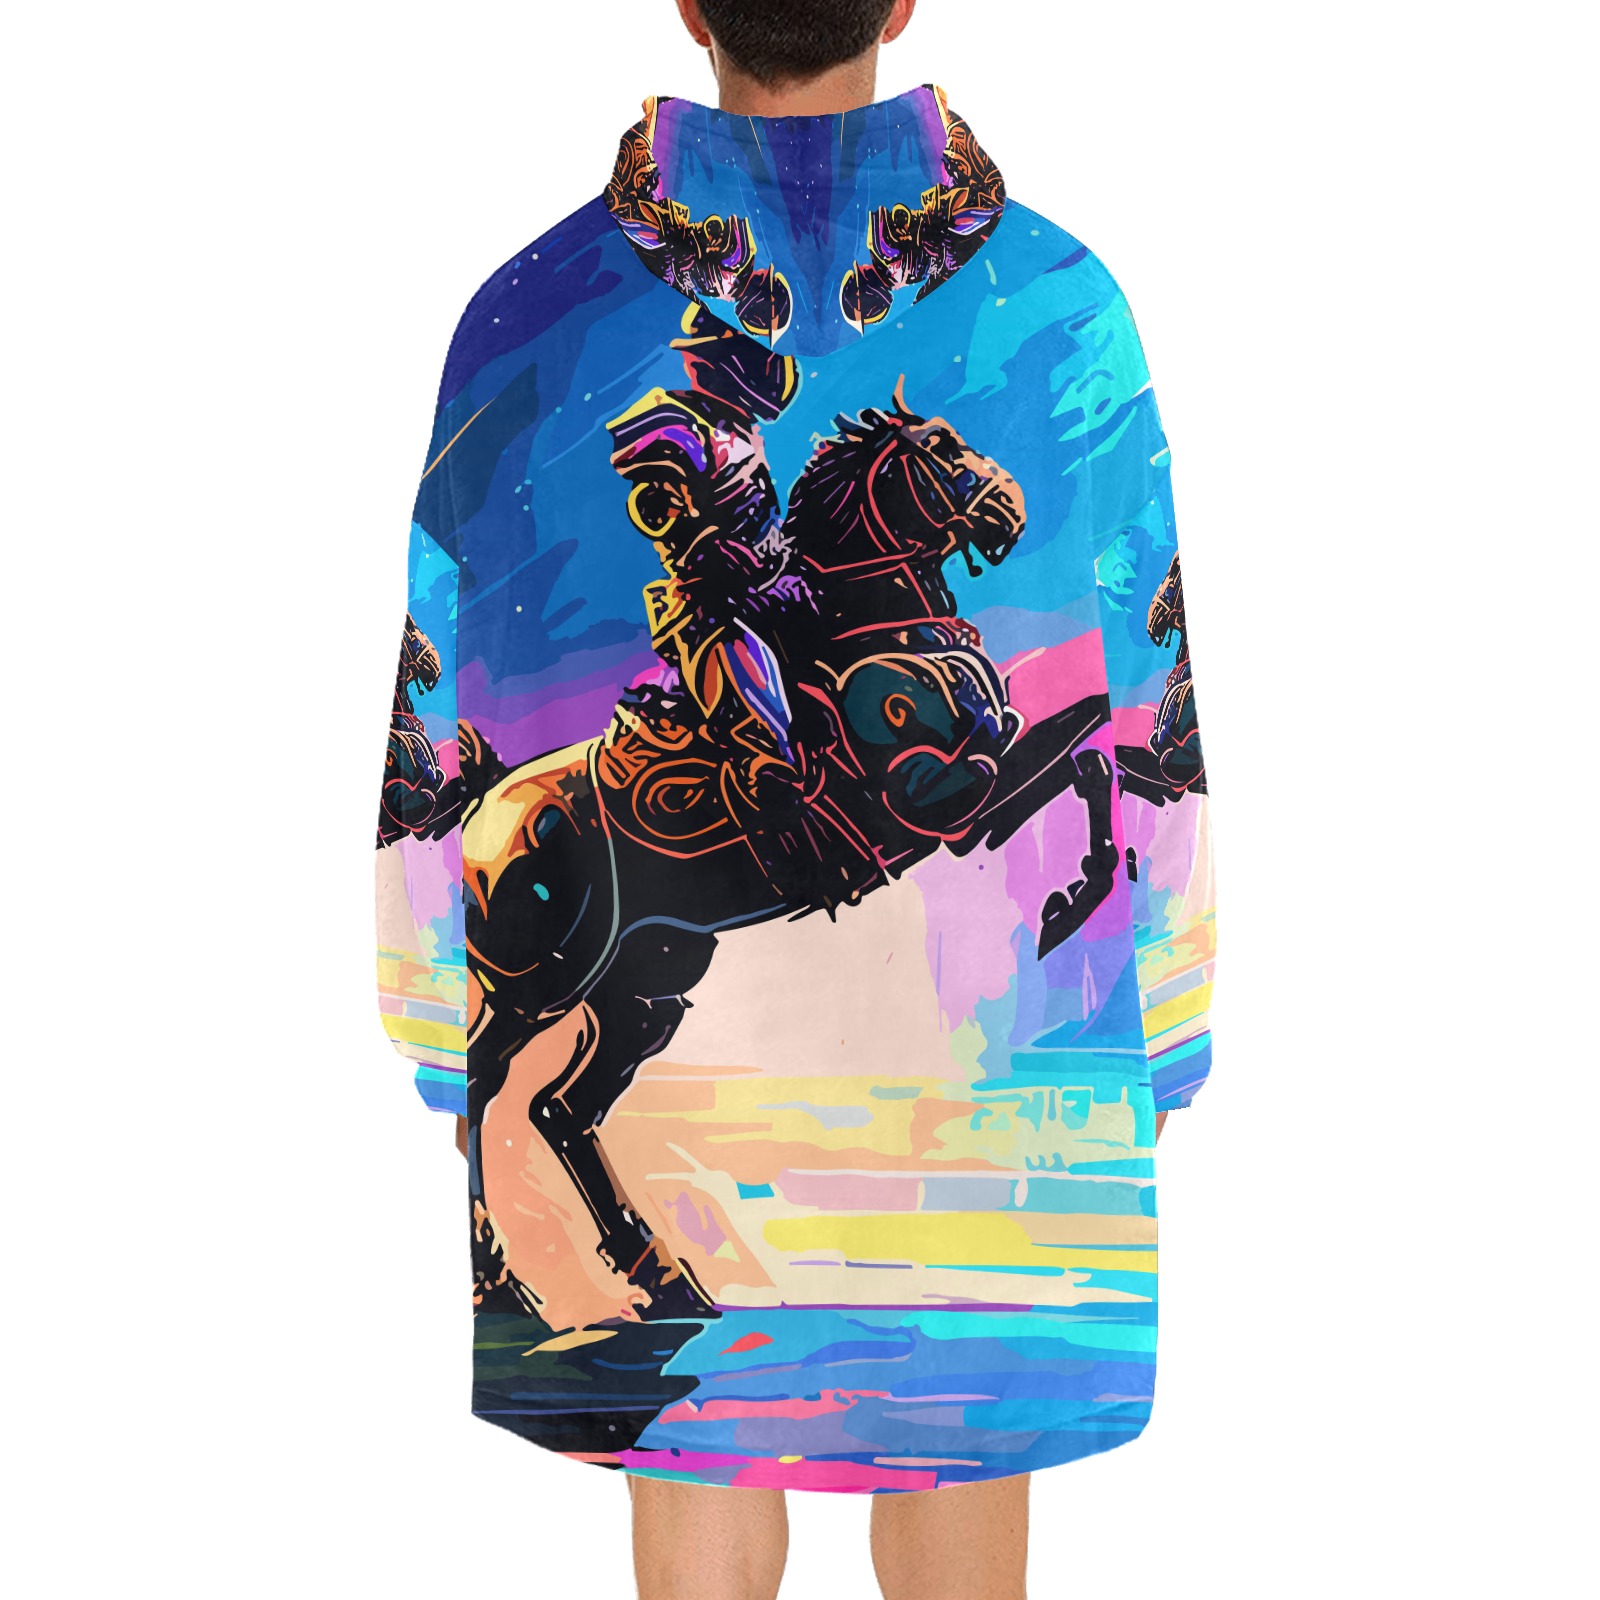 Knight On Horse Futuristic Cool Art Blanket Hoodie for Men